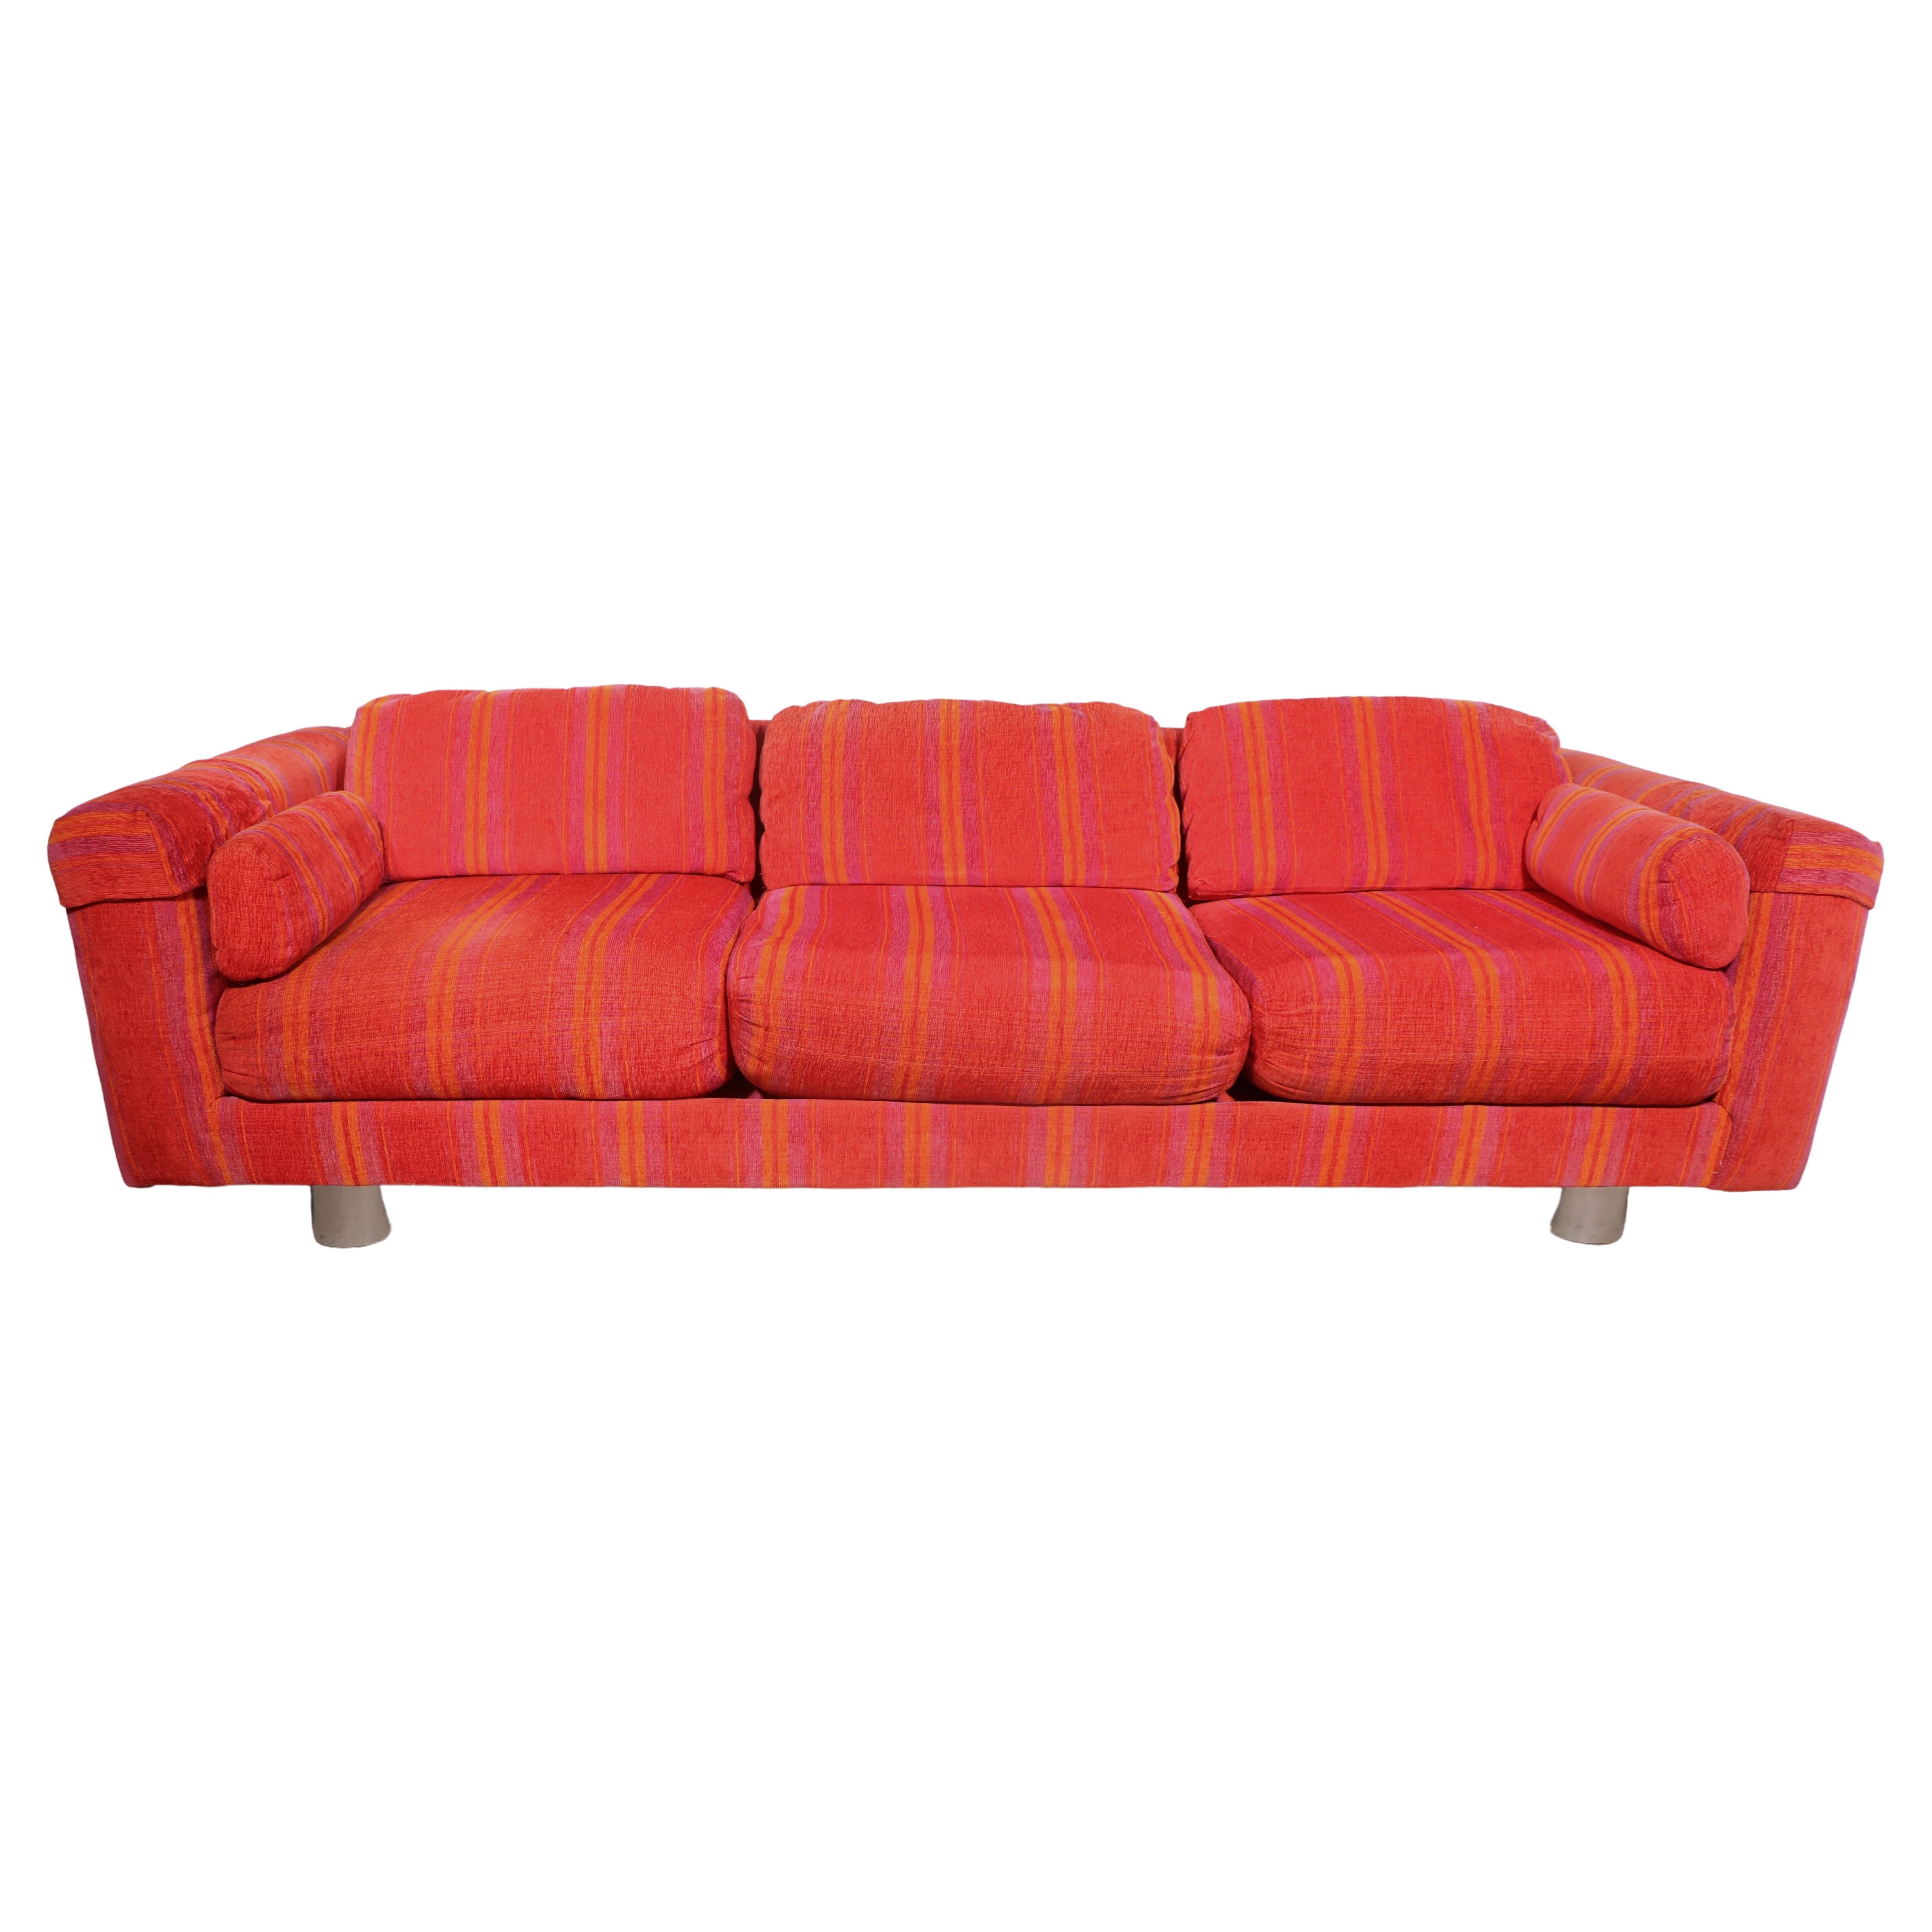 Postmodern Selig Imperial Sofa Possibly by Milo Baughman  For Sale